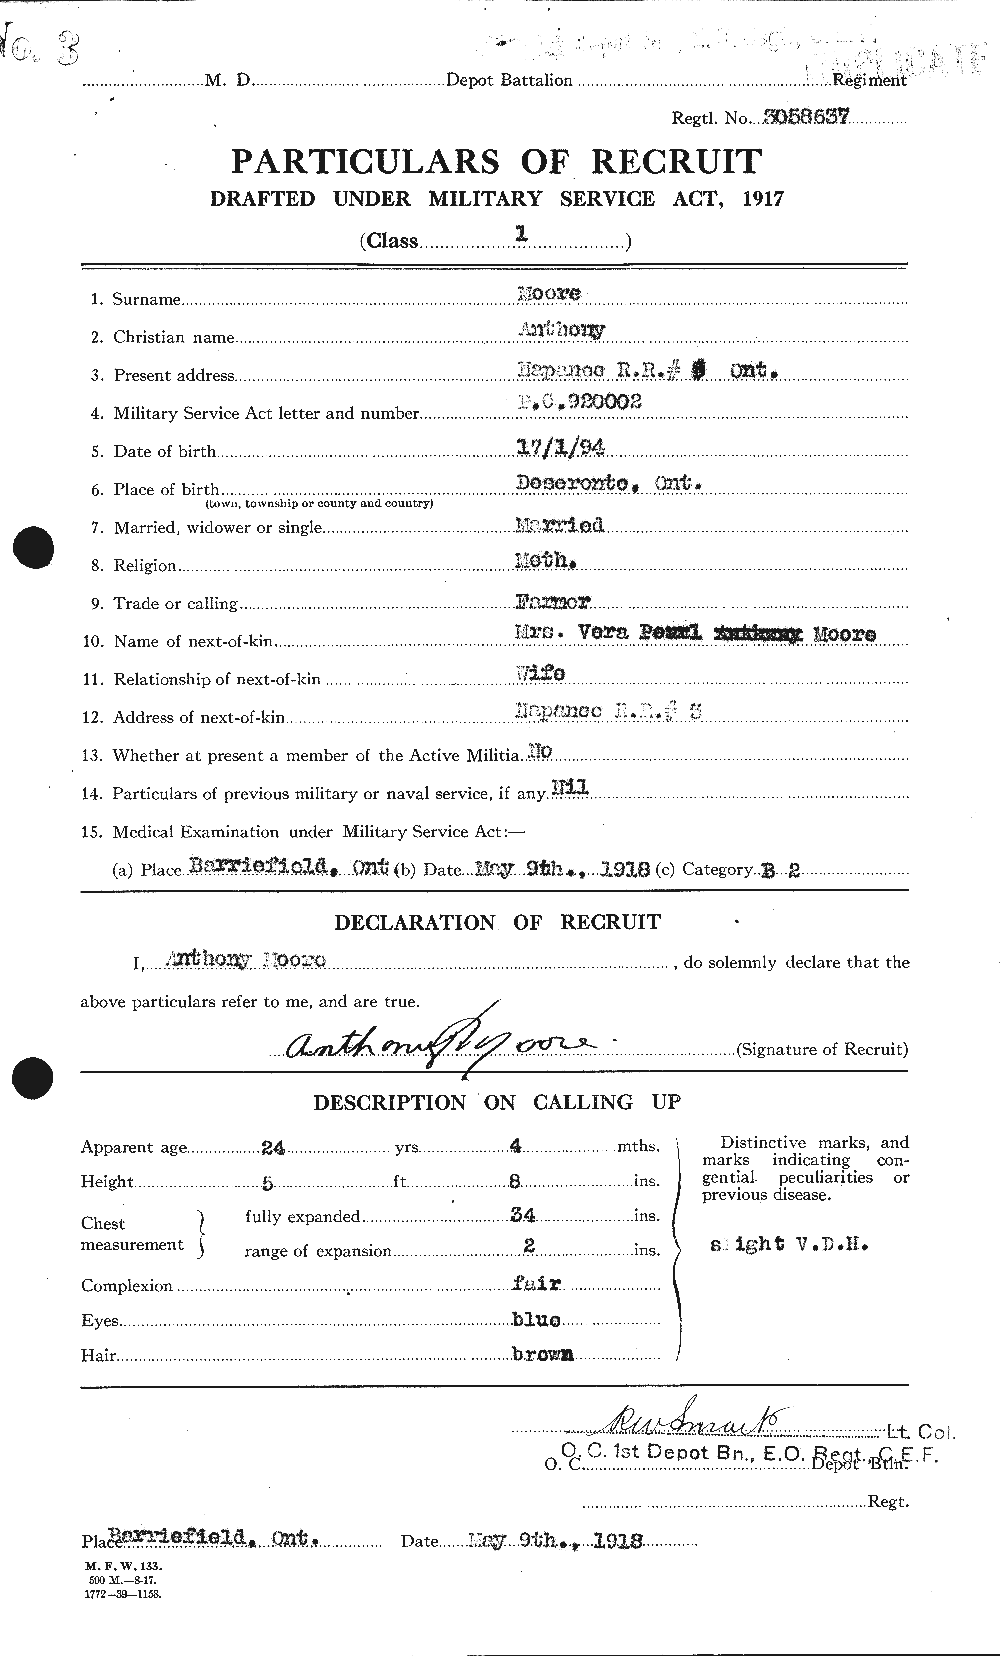 Personnel Records of the First World War - CEF 506412a